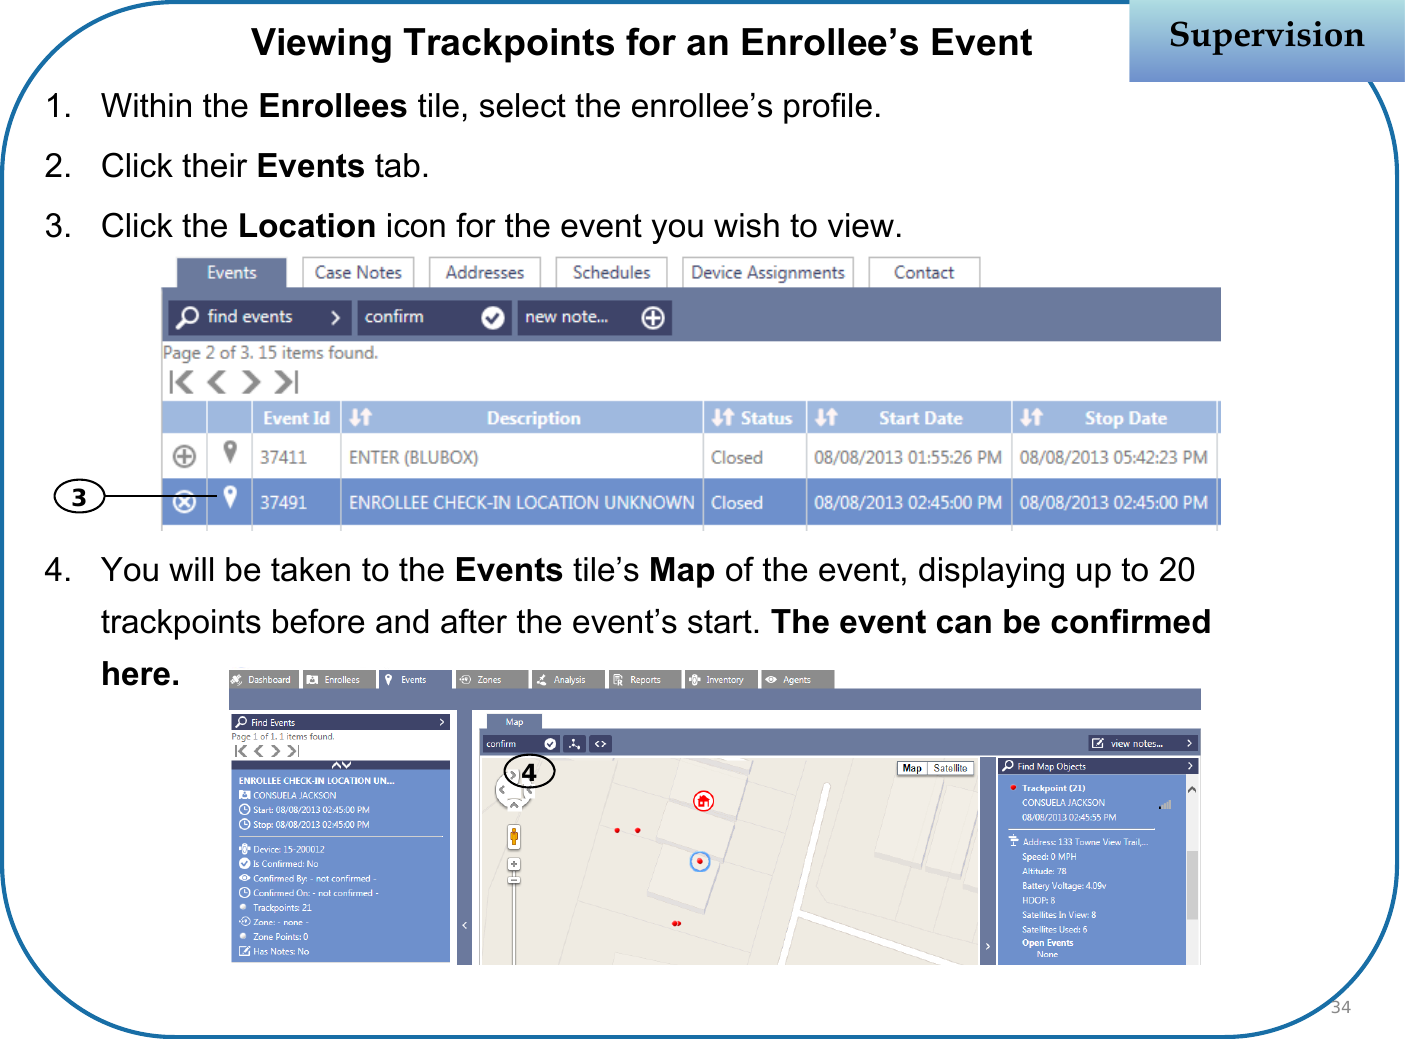 Viewing Trackpoints for an Enrollee’s Event1. Within the Enrollees tile, select the enrollee’s profile.2. Click their Events tab.3. Click the Location icon for the event you wish to view. 4. You will be taken to the Events tile’s Map of the event, displaying up to 20 trackpoints before and after the event’s start. The event can be confirmed here.SupervisionSupervision3434